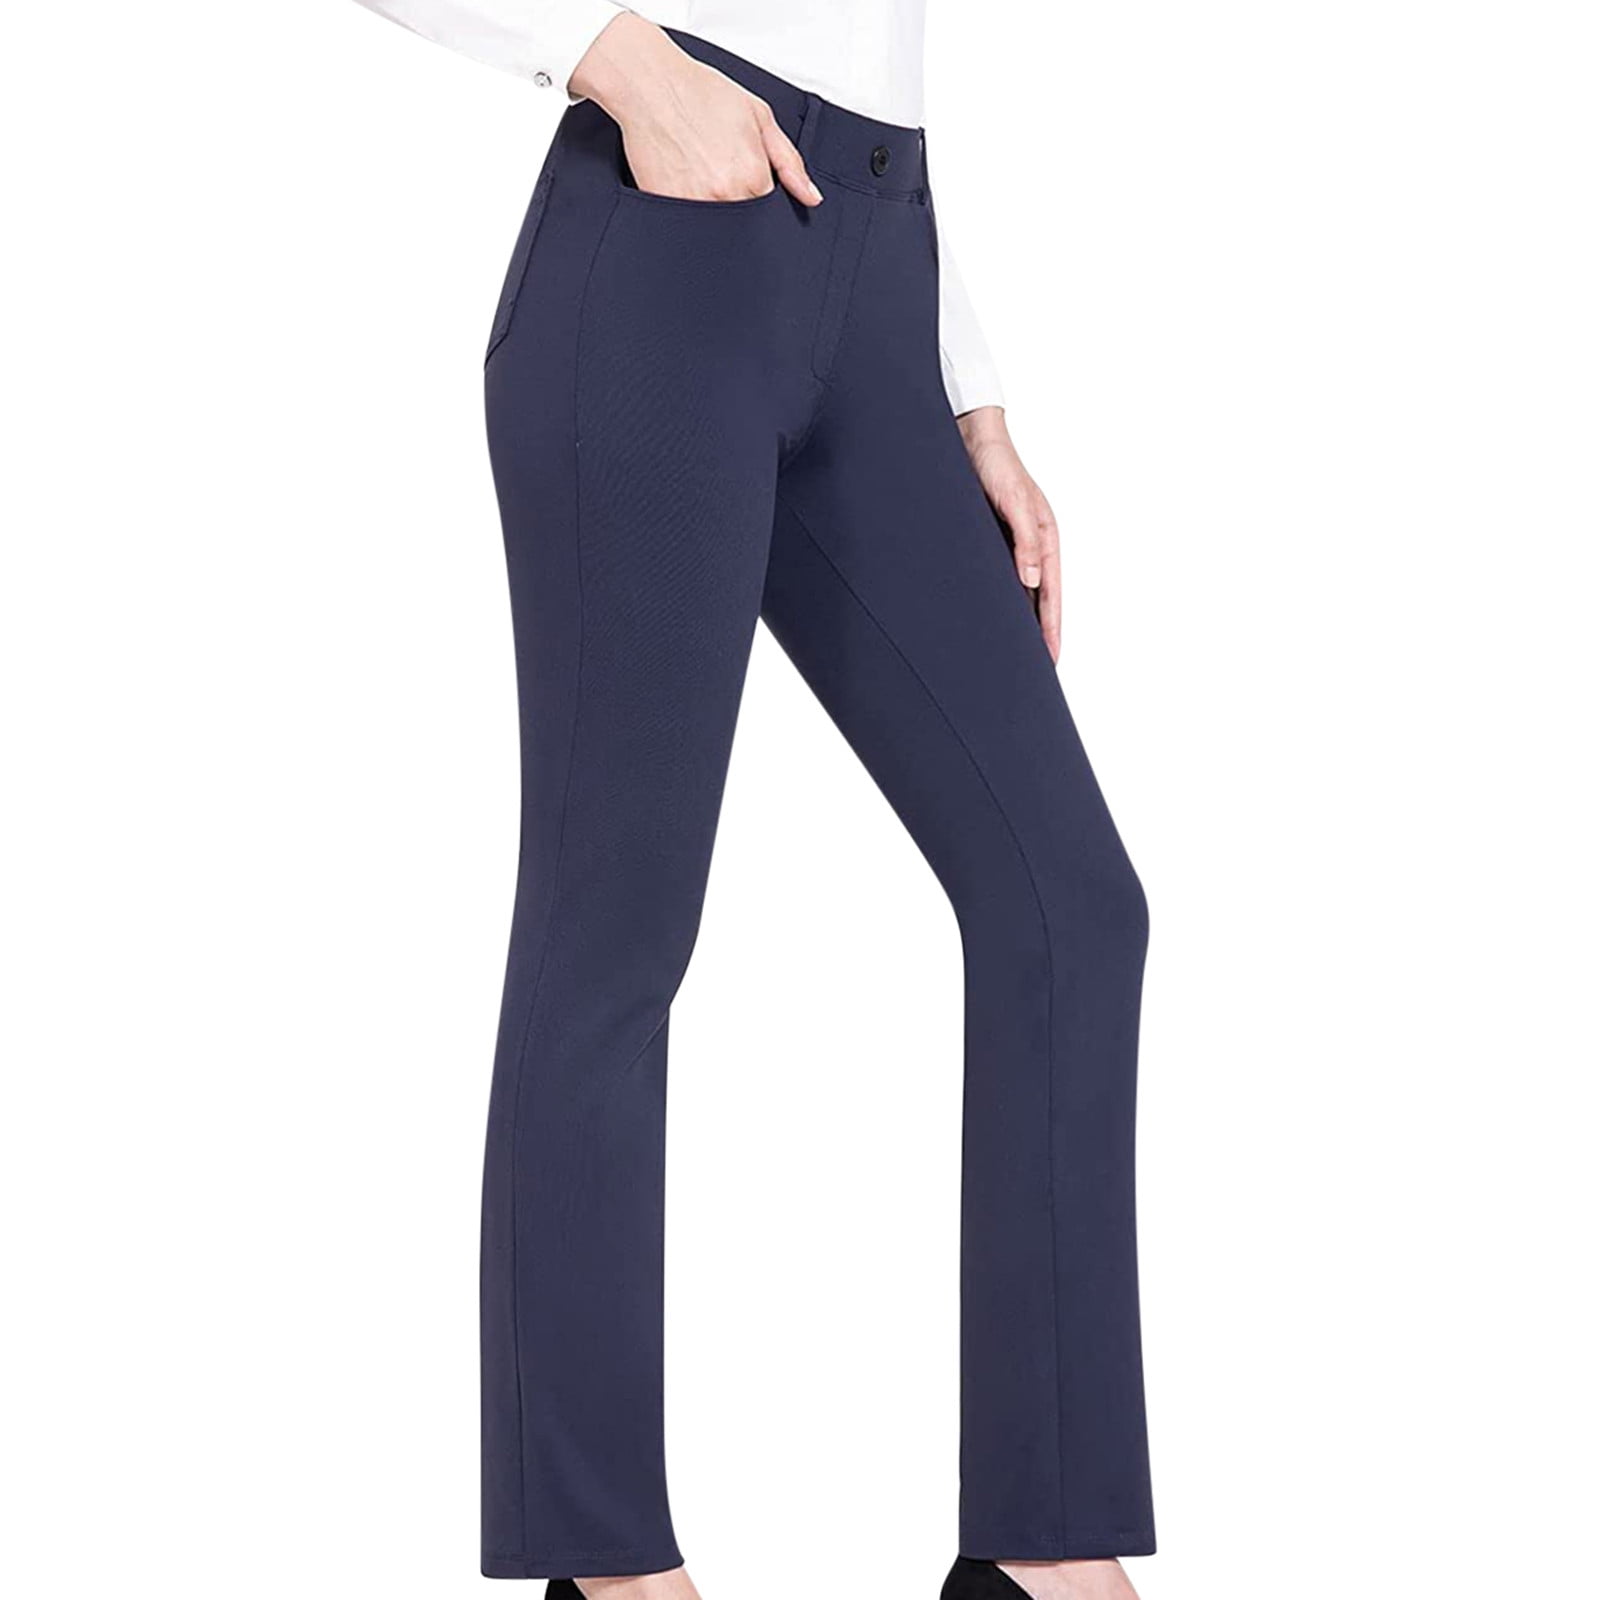 AherBiu Womens Work Pants High Waisted Slim Tight Pencil Pants Business  Casual Leggings Trousers Solid Color 